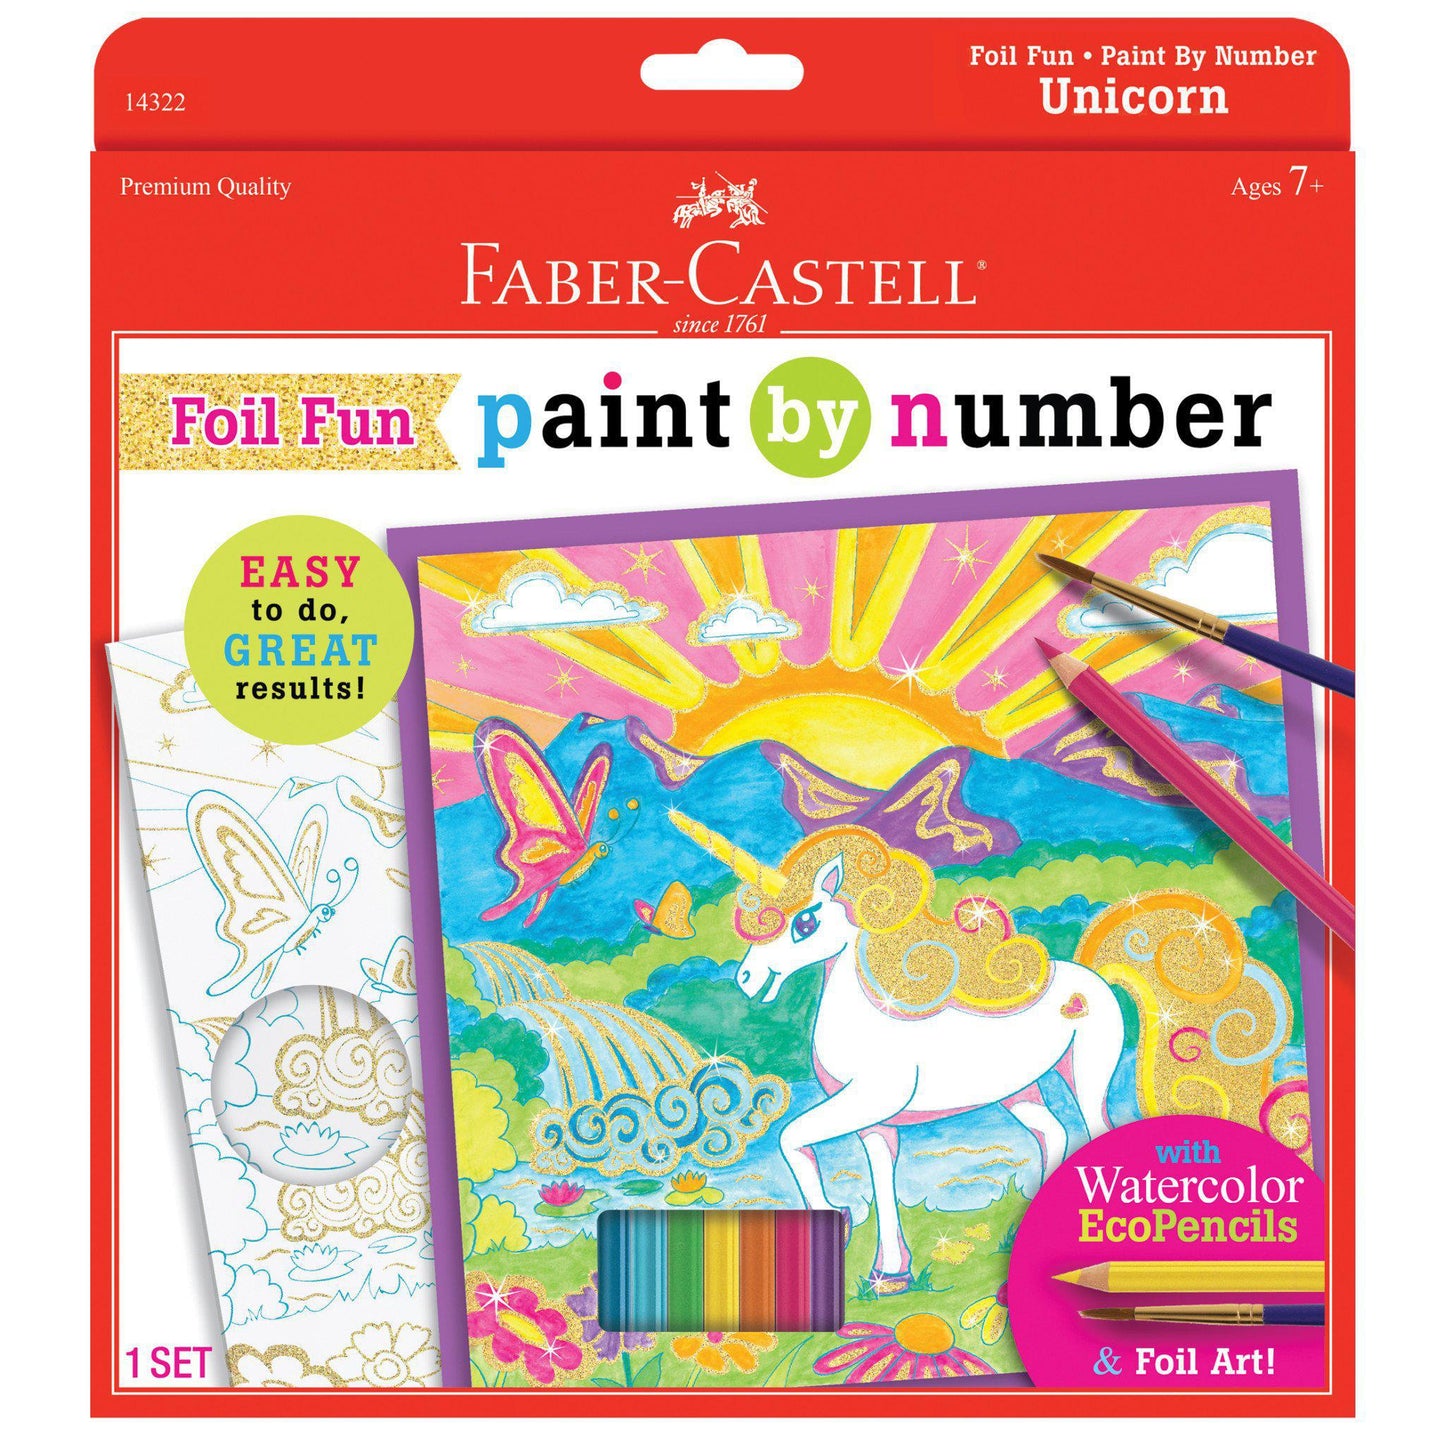 Faber-Castell Paint by Number Foil Fun - Unicorns - Color and Display 1 Unicorn Paint by Number Board